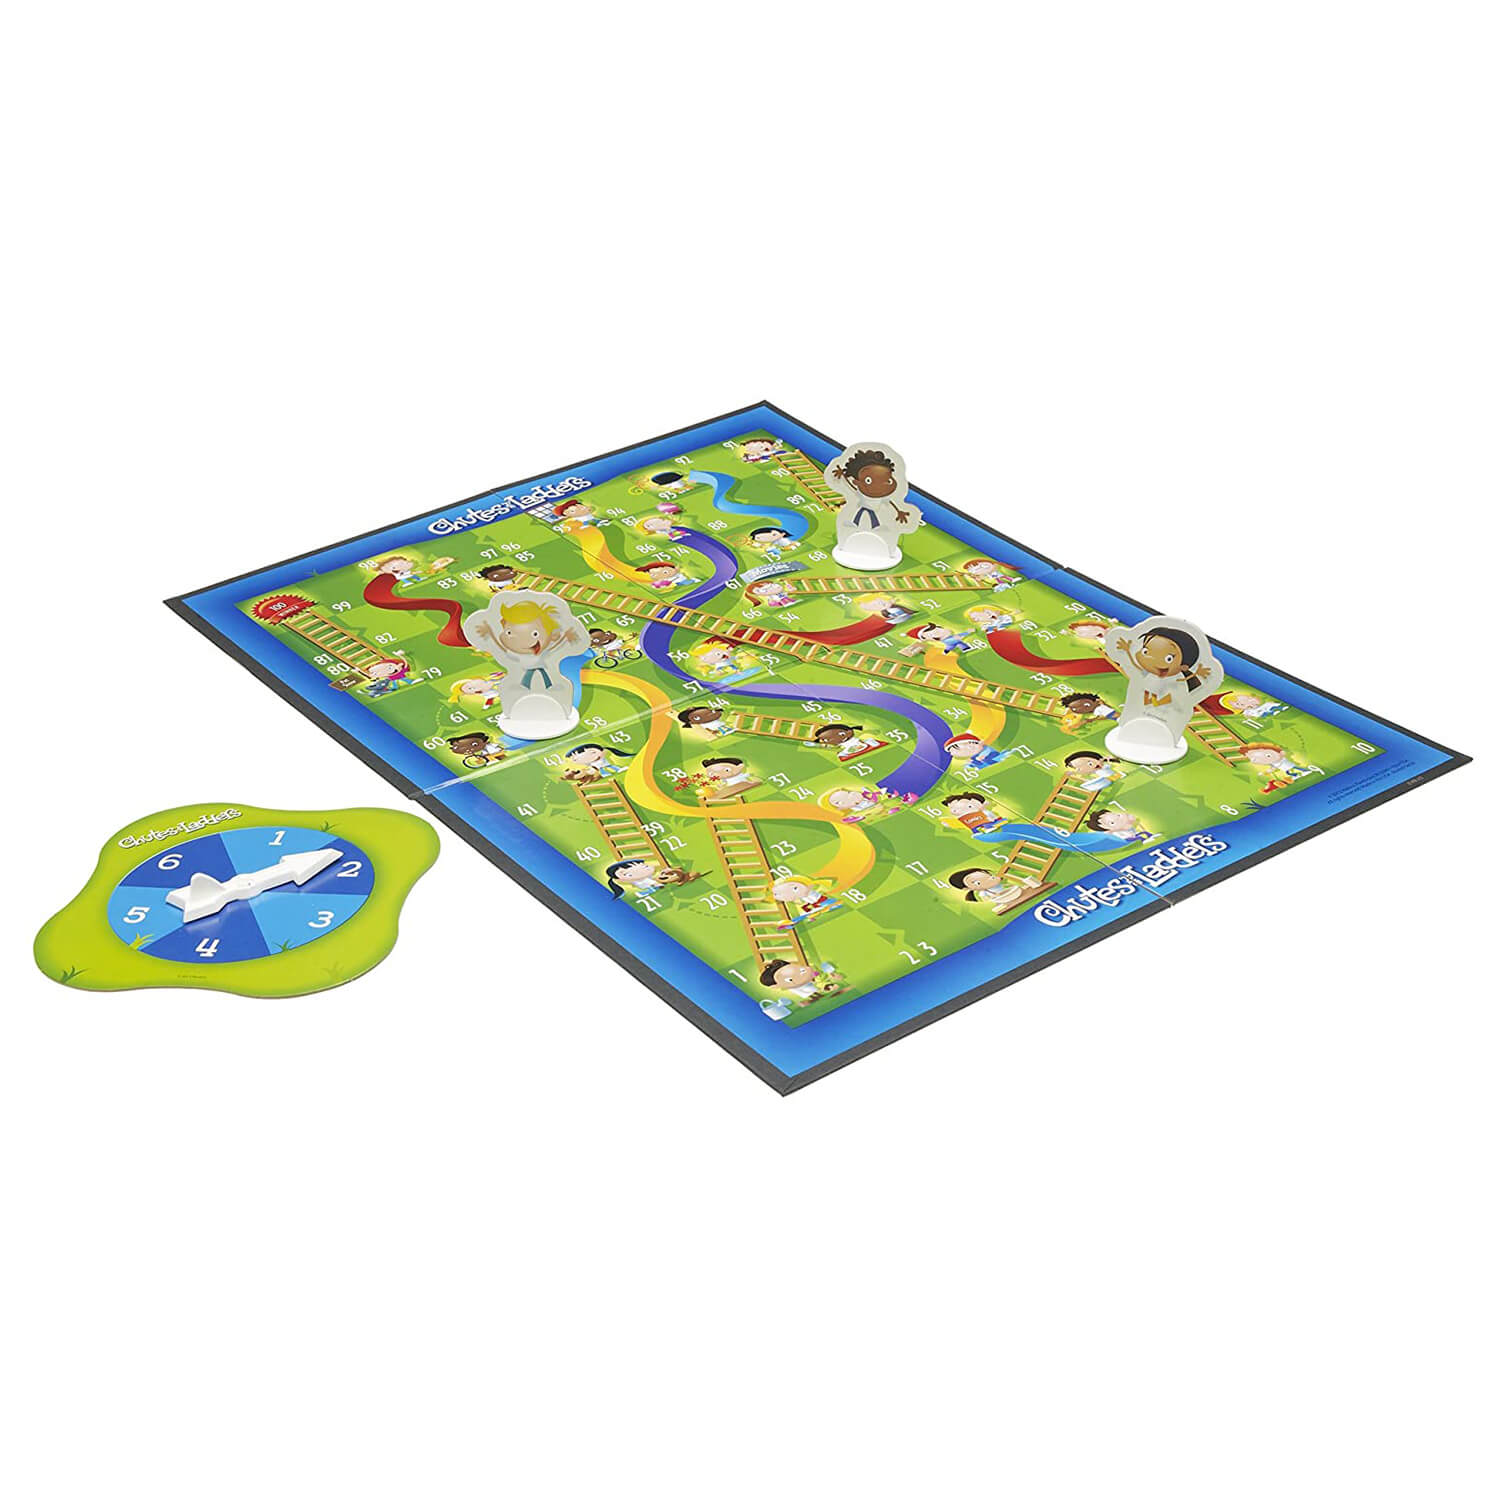 Chutes and Ladders - Classic Kids Game